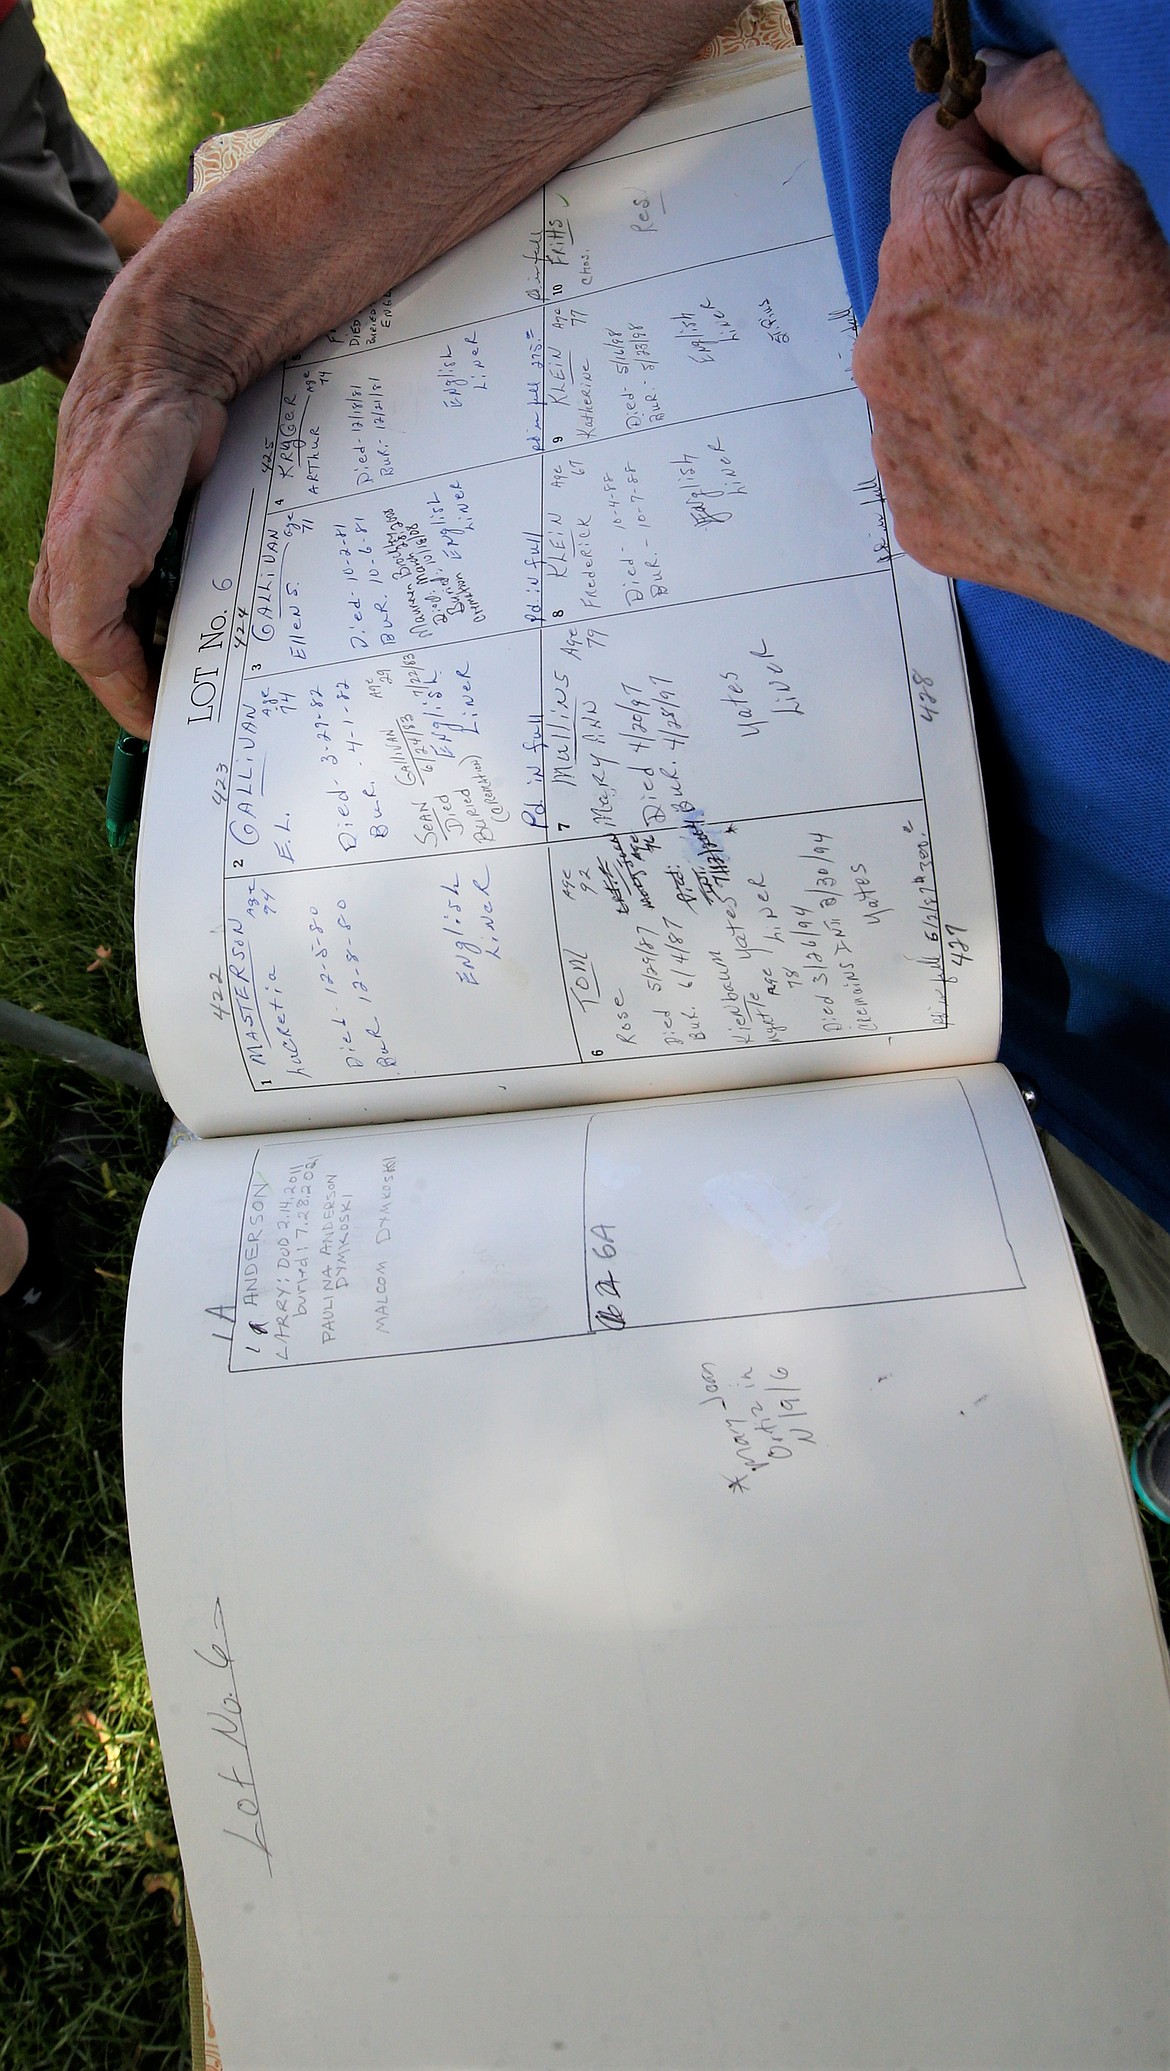 Some of the records of burial sites at St. Thomas Cemetery.